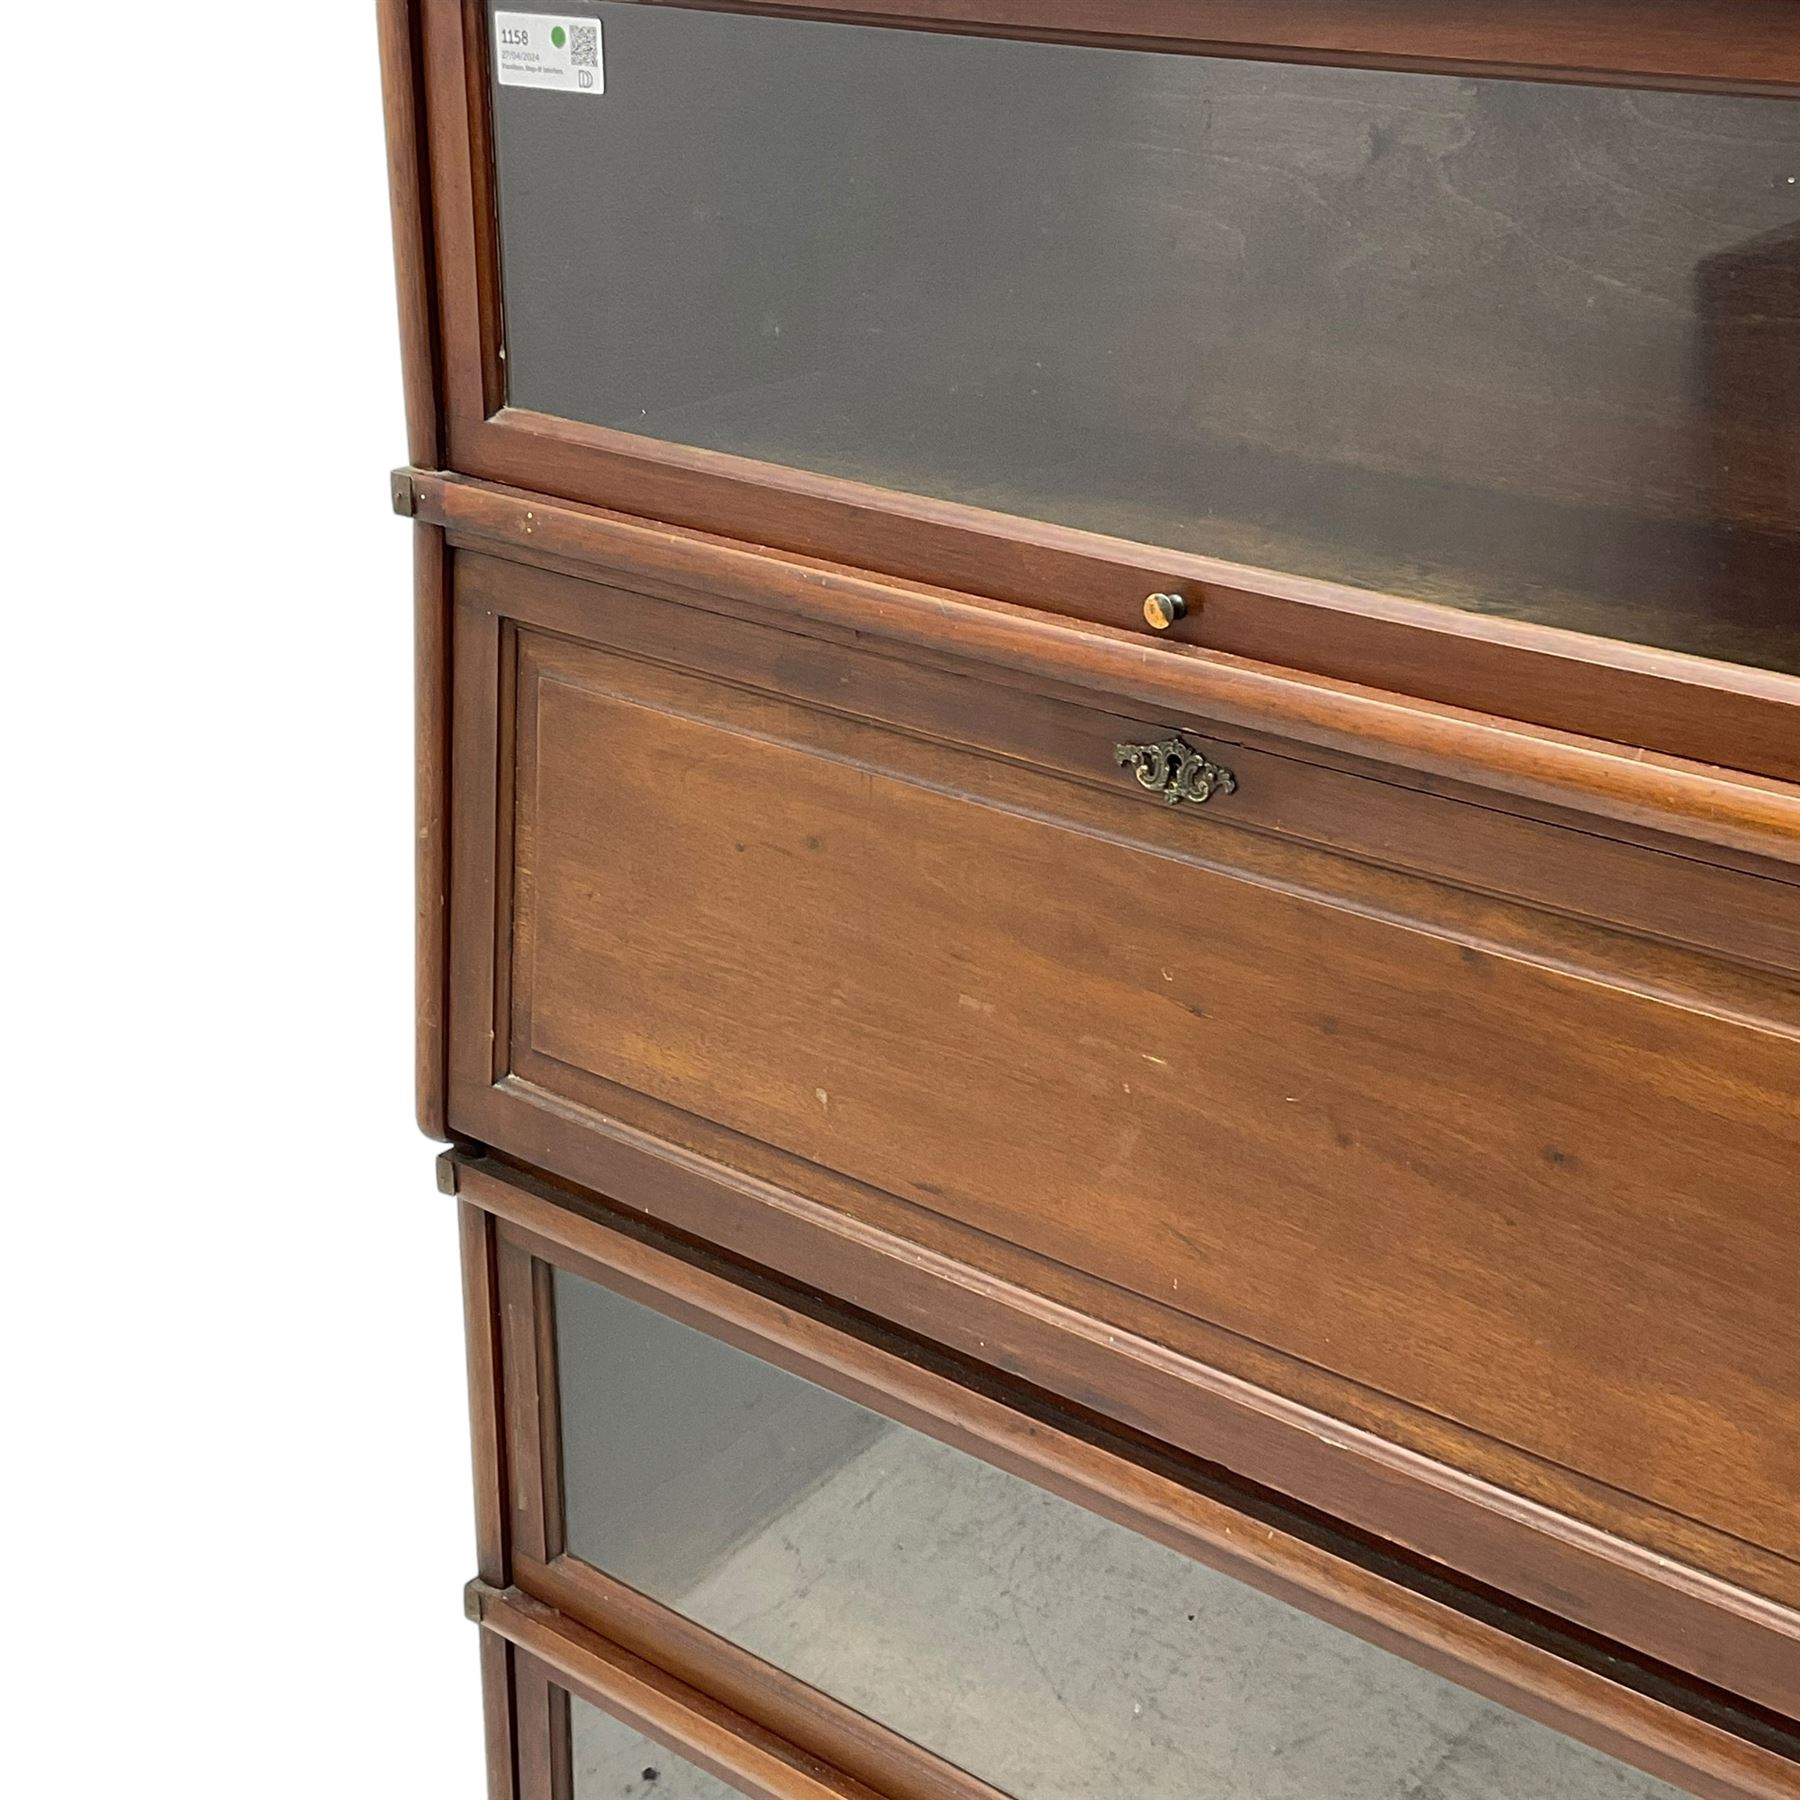 Globe Wernicke - early 20th century mahogany four-tier stacking library bookcase - Image 4 of 5